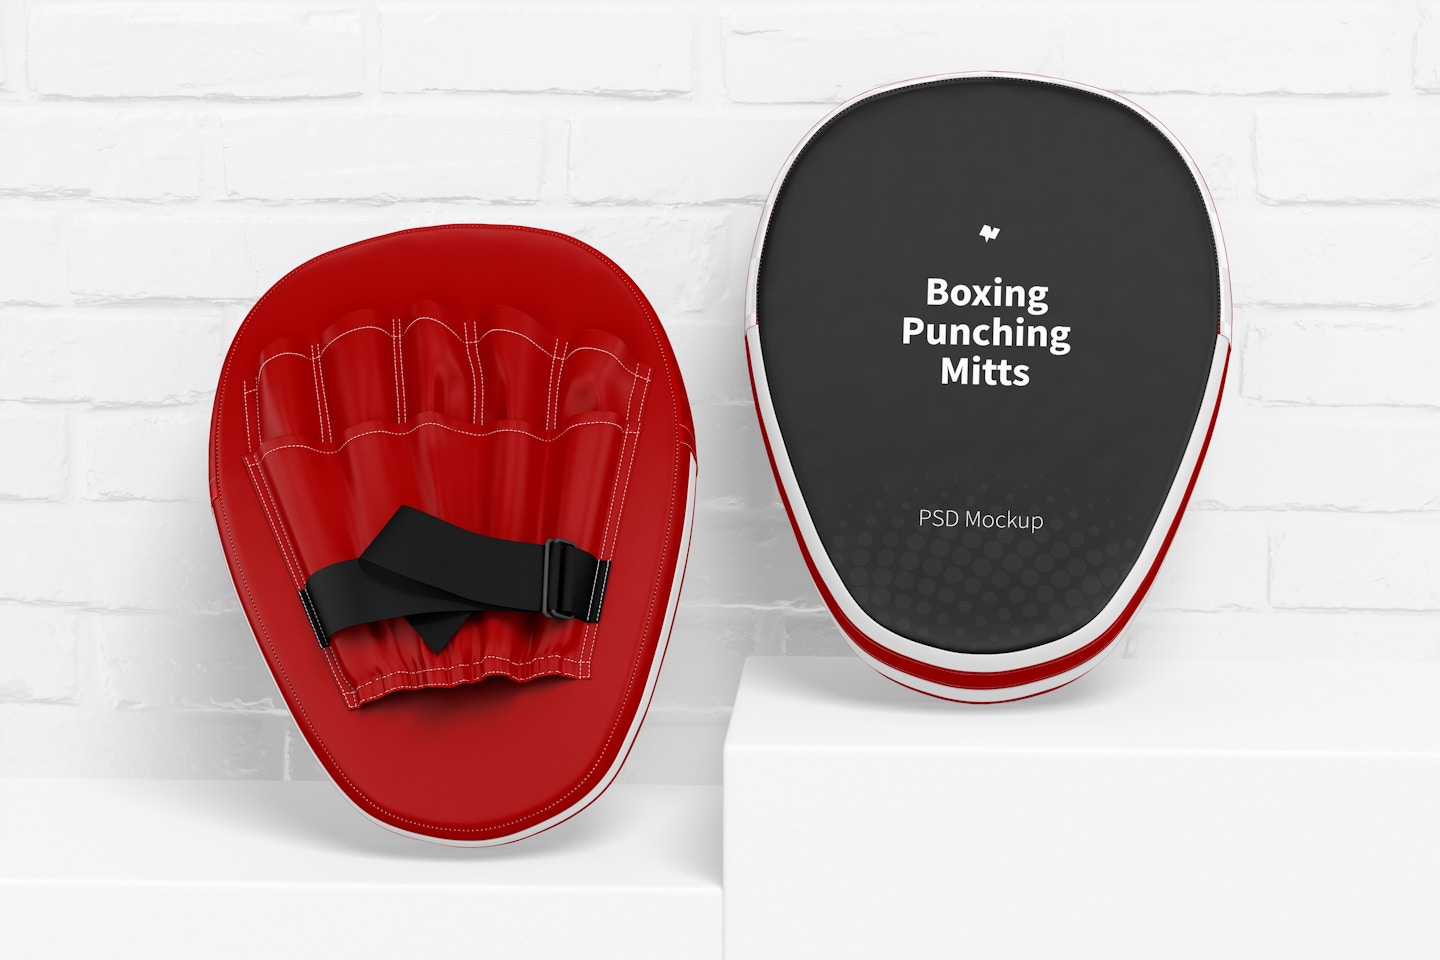 Boxing Punching Mitts Mockup, Front and Back View